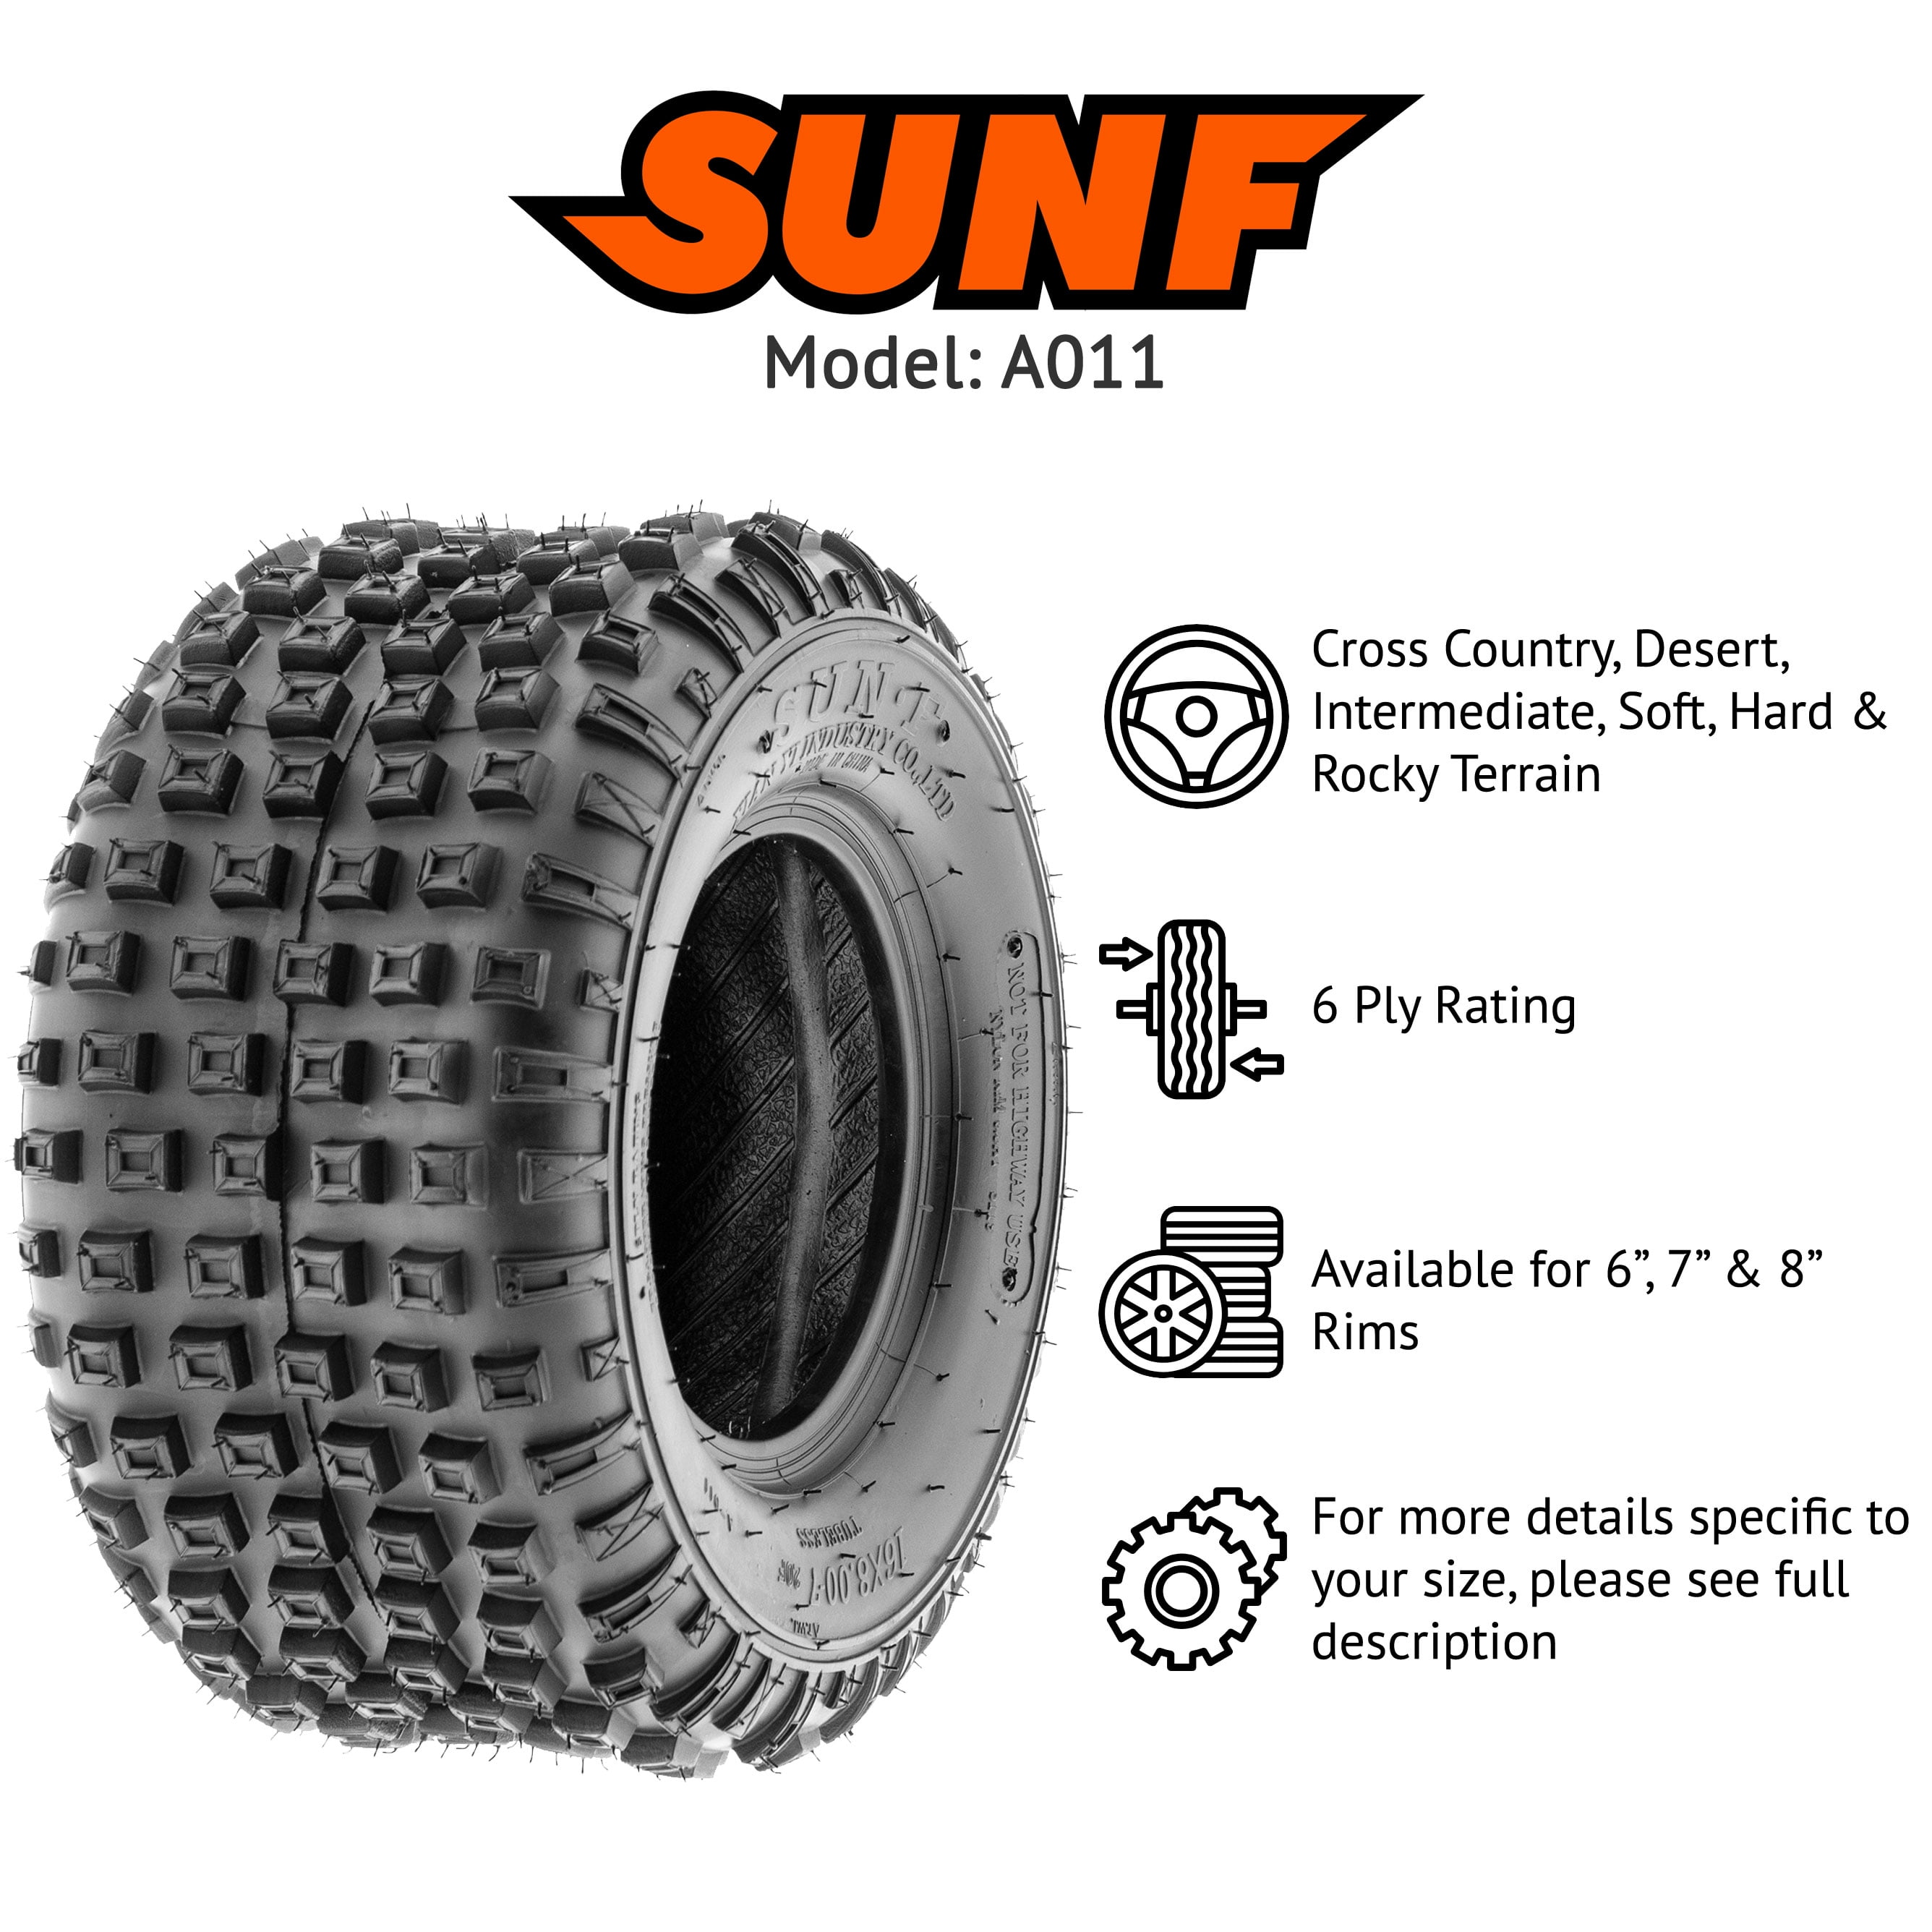 15x7-6 15x7x6 Quad ATV All Terrain AT 6 Ply Tires A011 by SunF Pair of 2